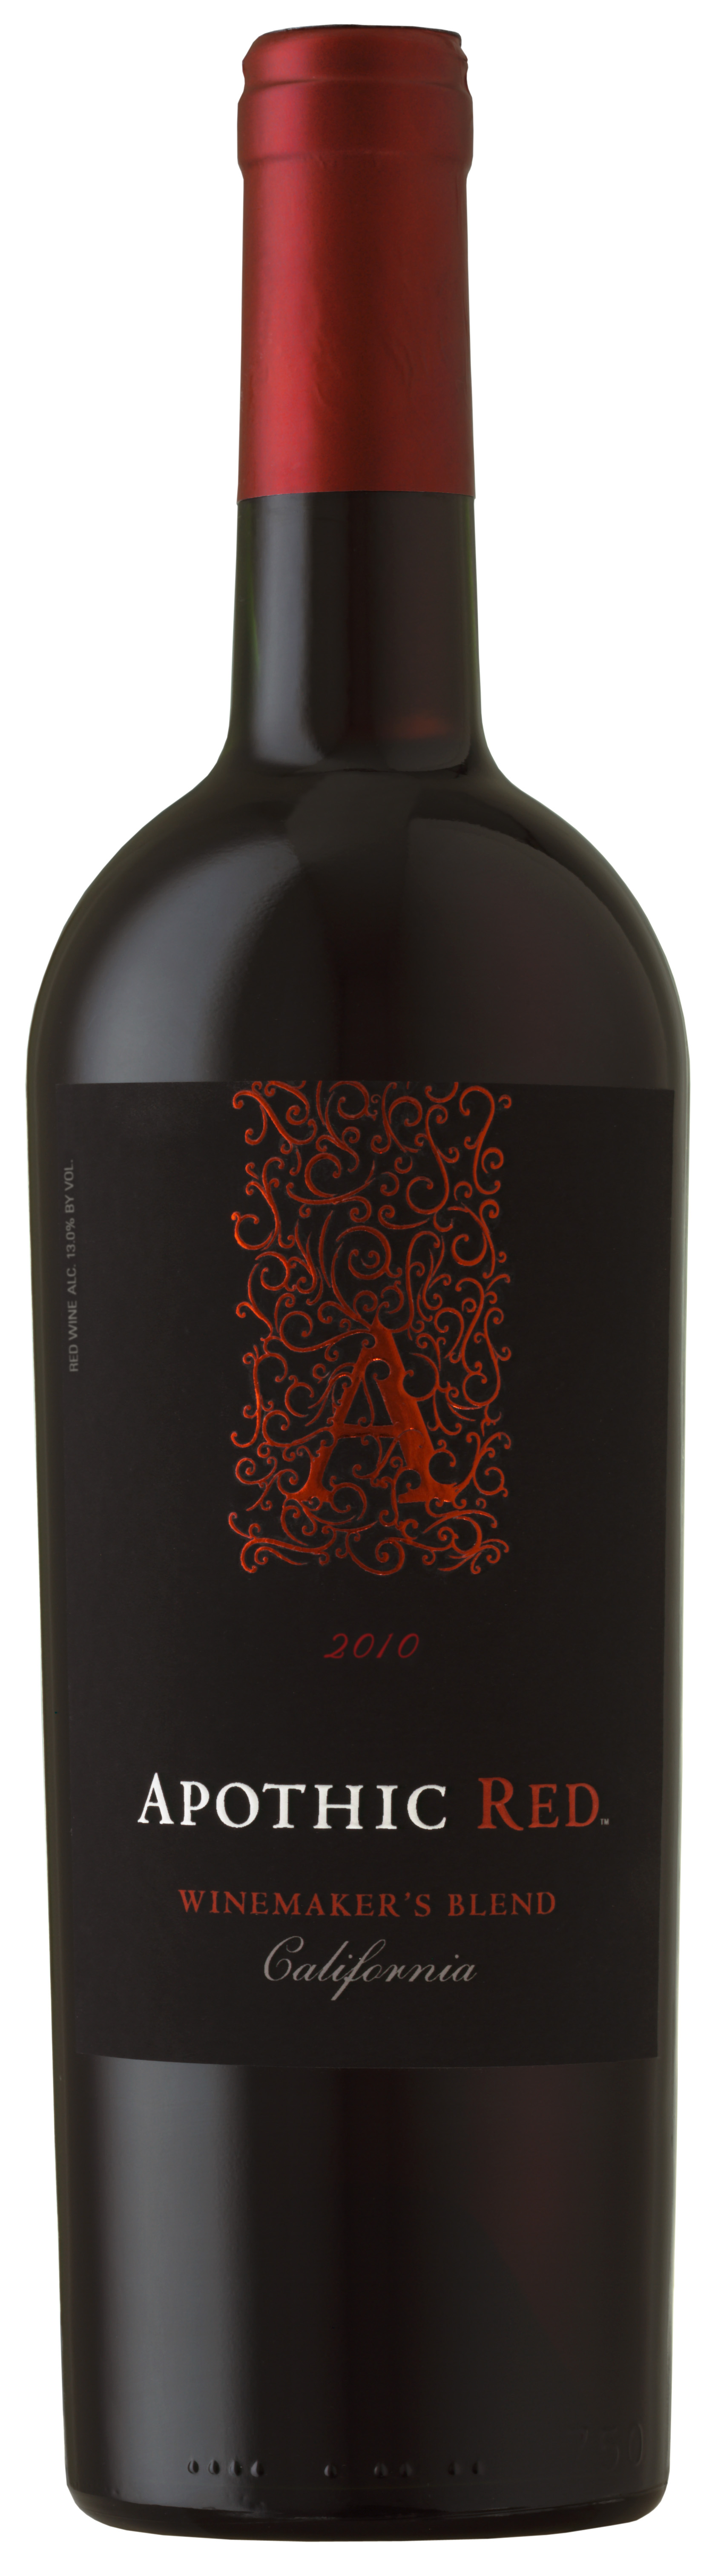 Ret konkurrerende bryllup Apothic Red Wine | Bite of the Best